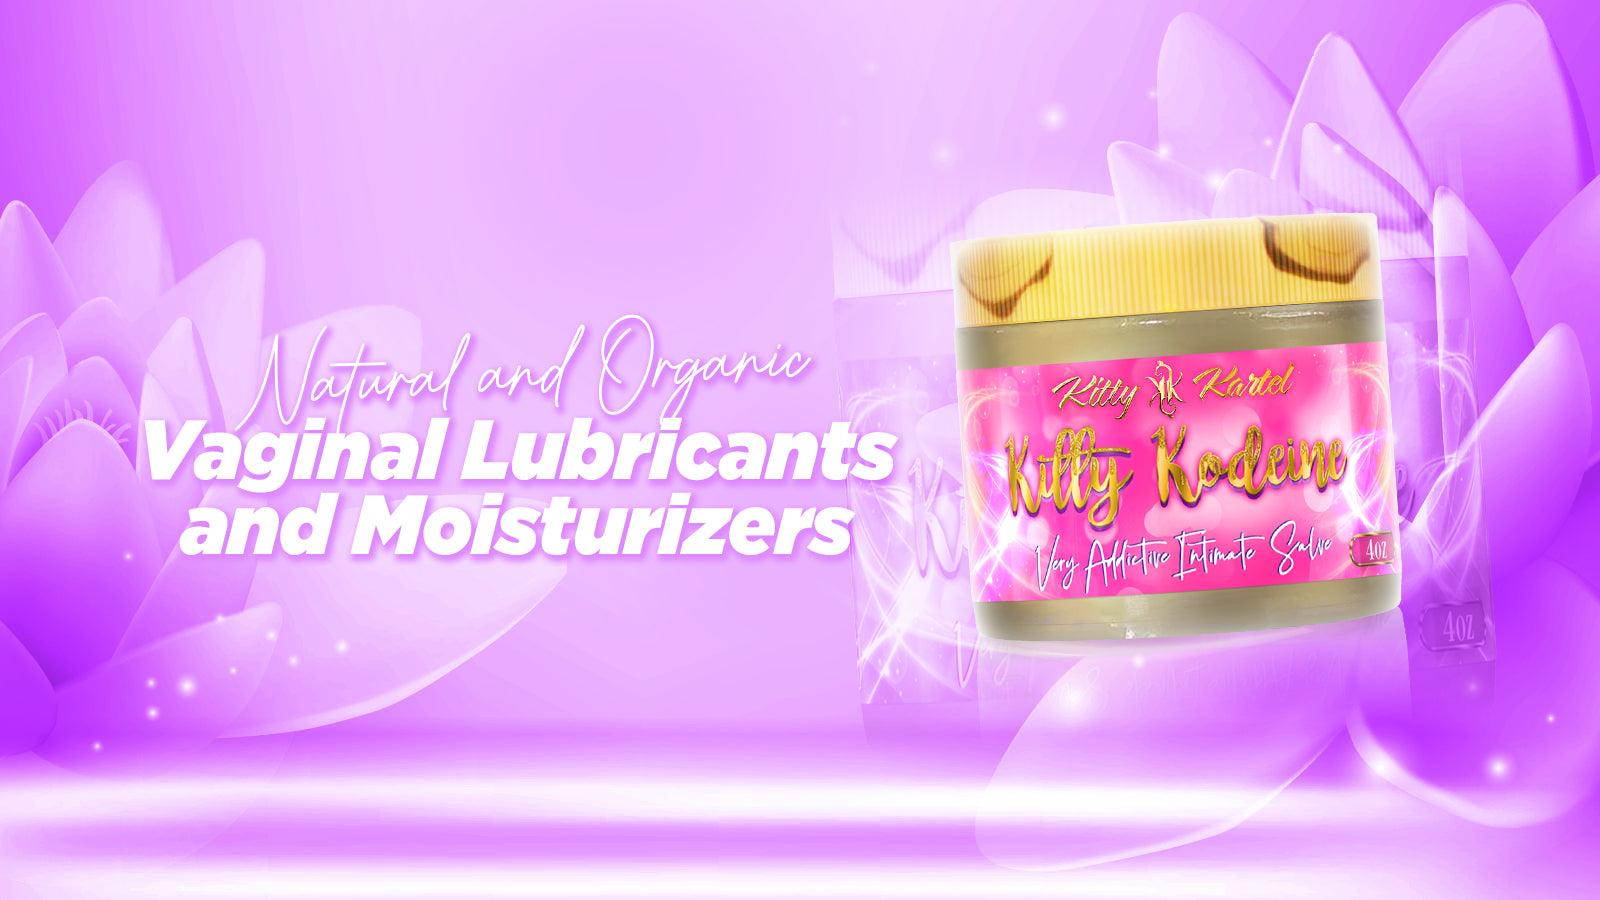 Natural and Organic Vaginal Lubricants and Moisturizers